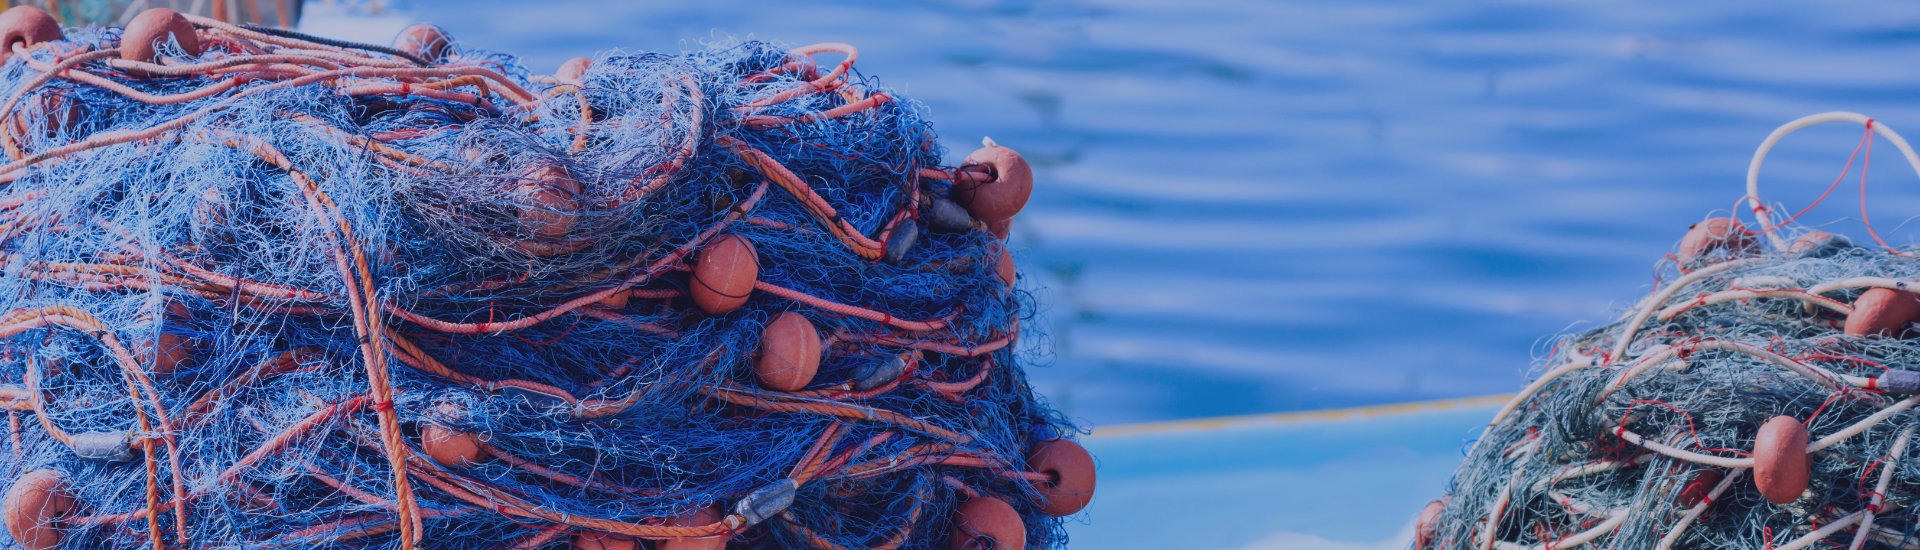 stacks-of-fishing-nets-on-blue-sea-water-PCQM92Y